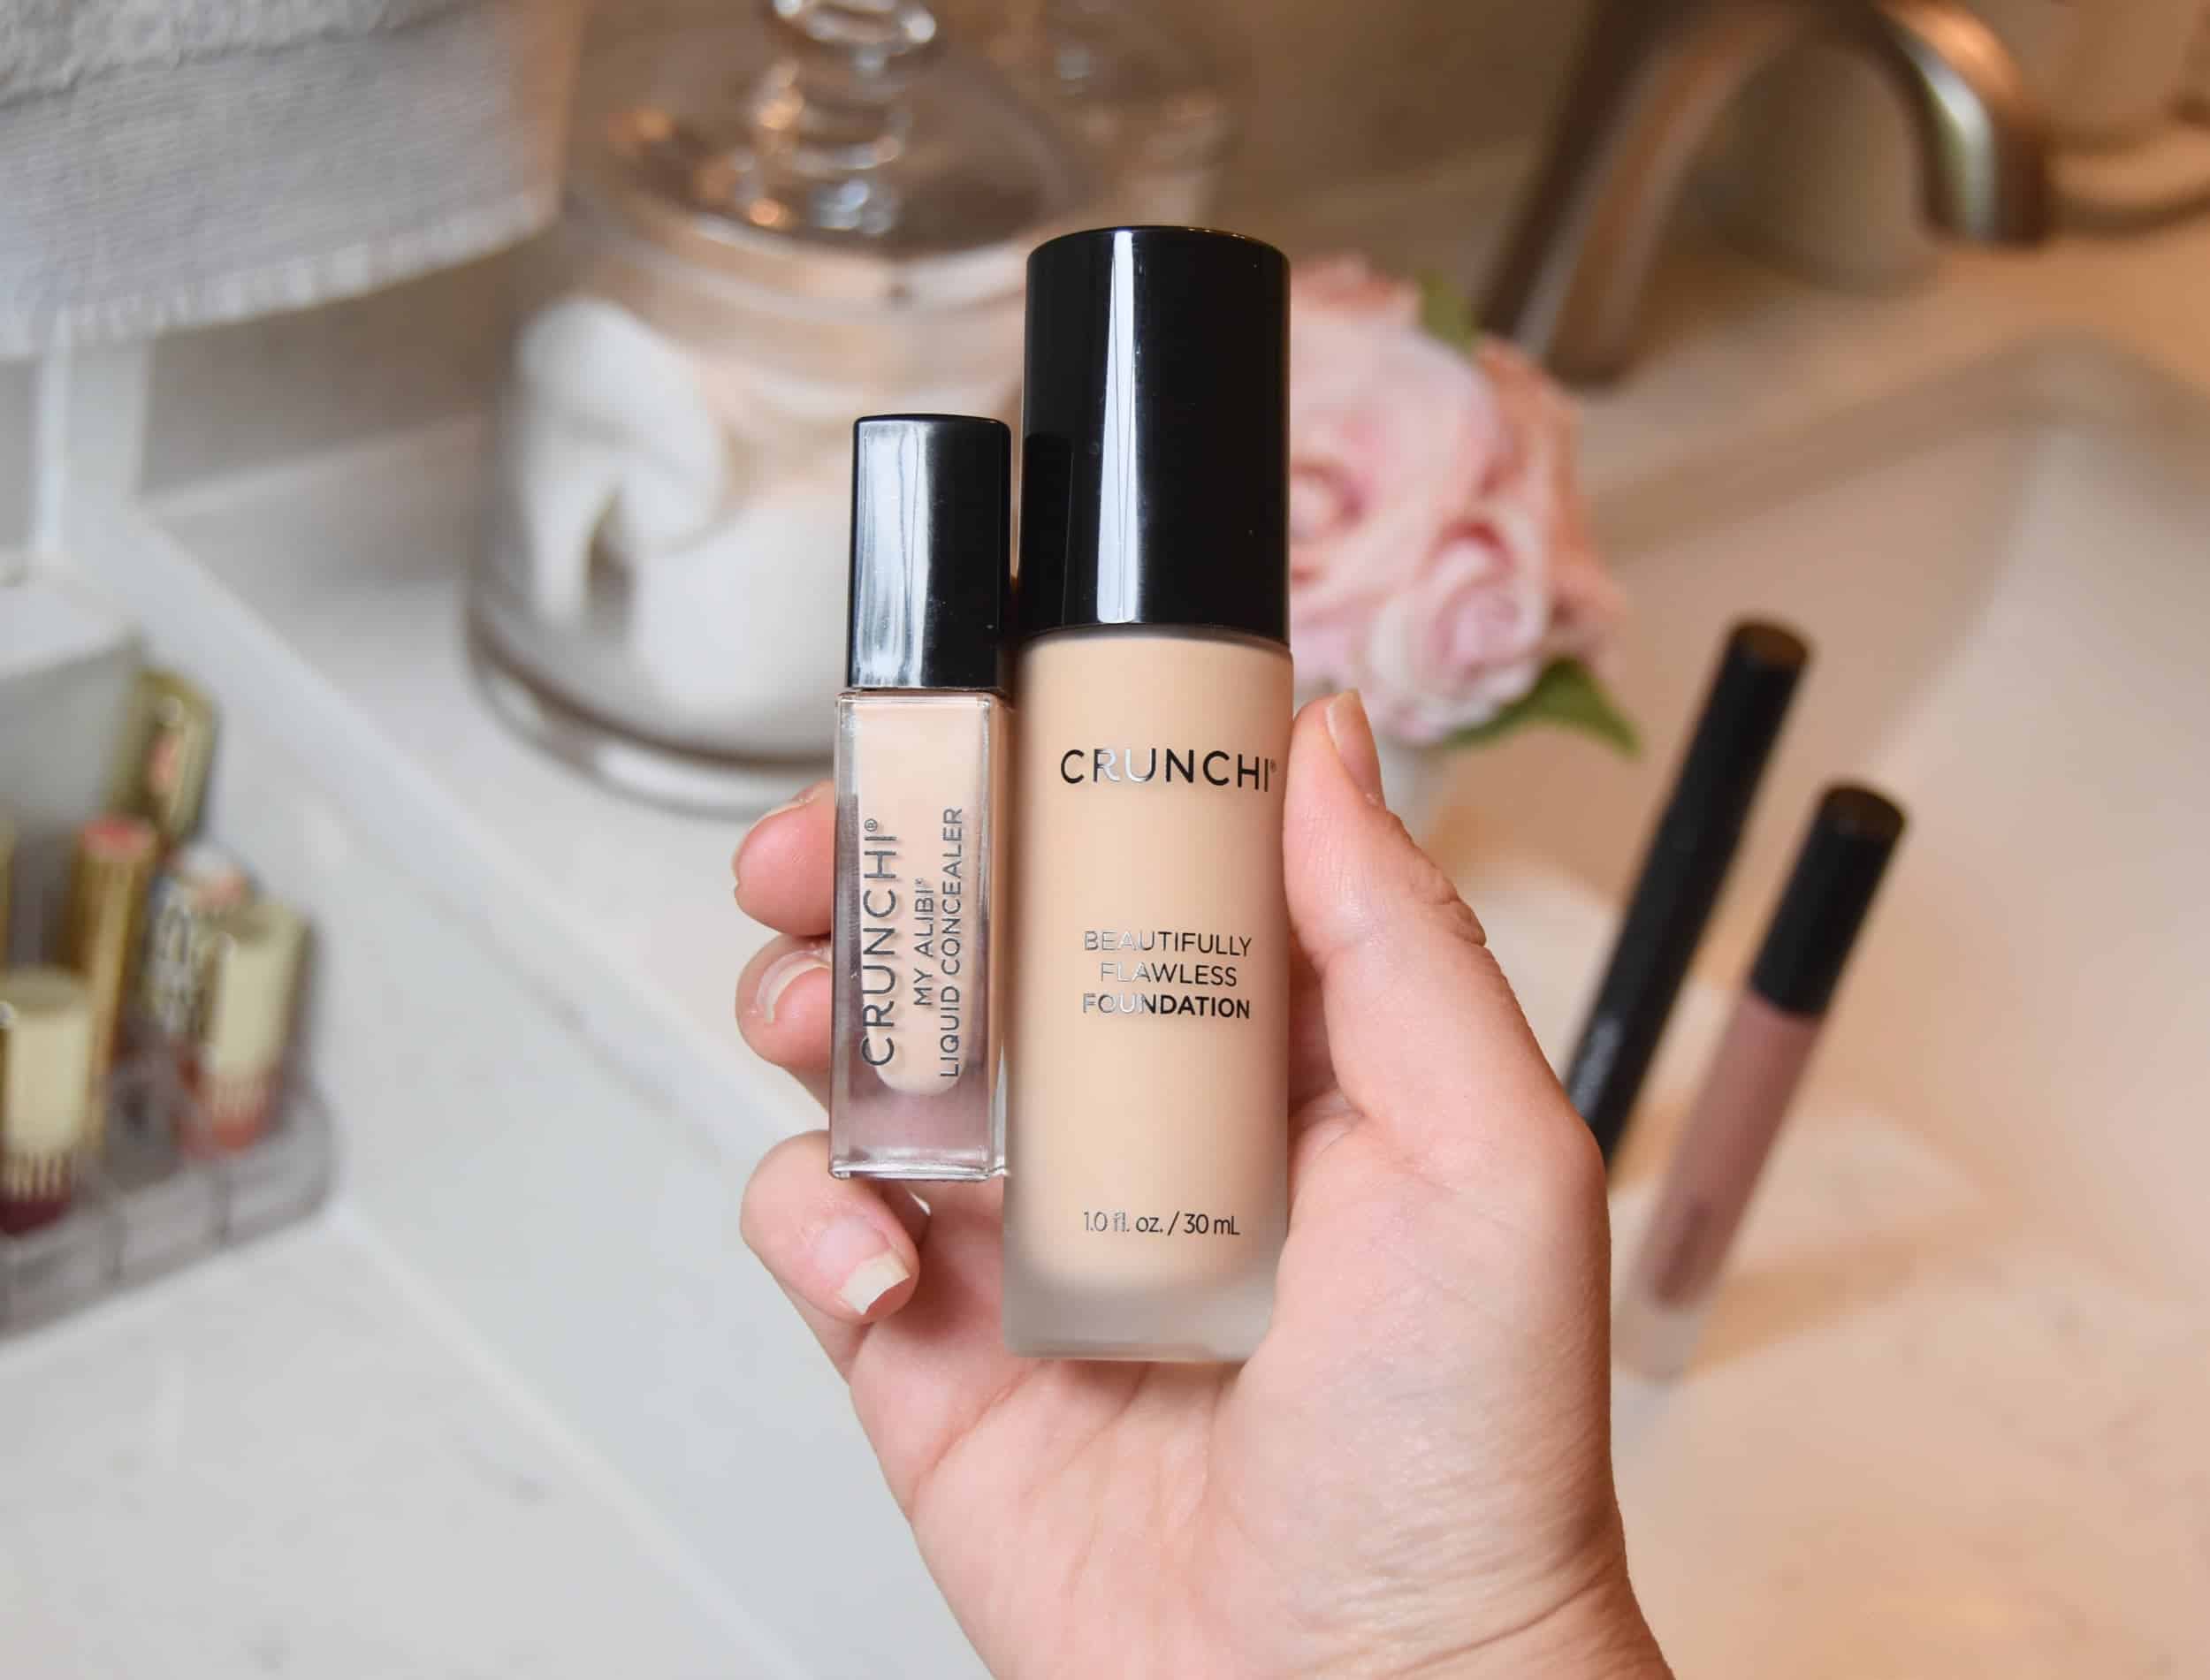 Two clean makeup options that can be swapped for conventional ones.